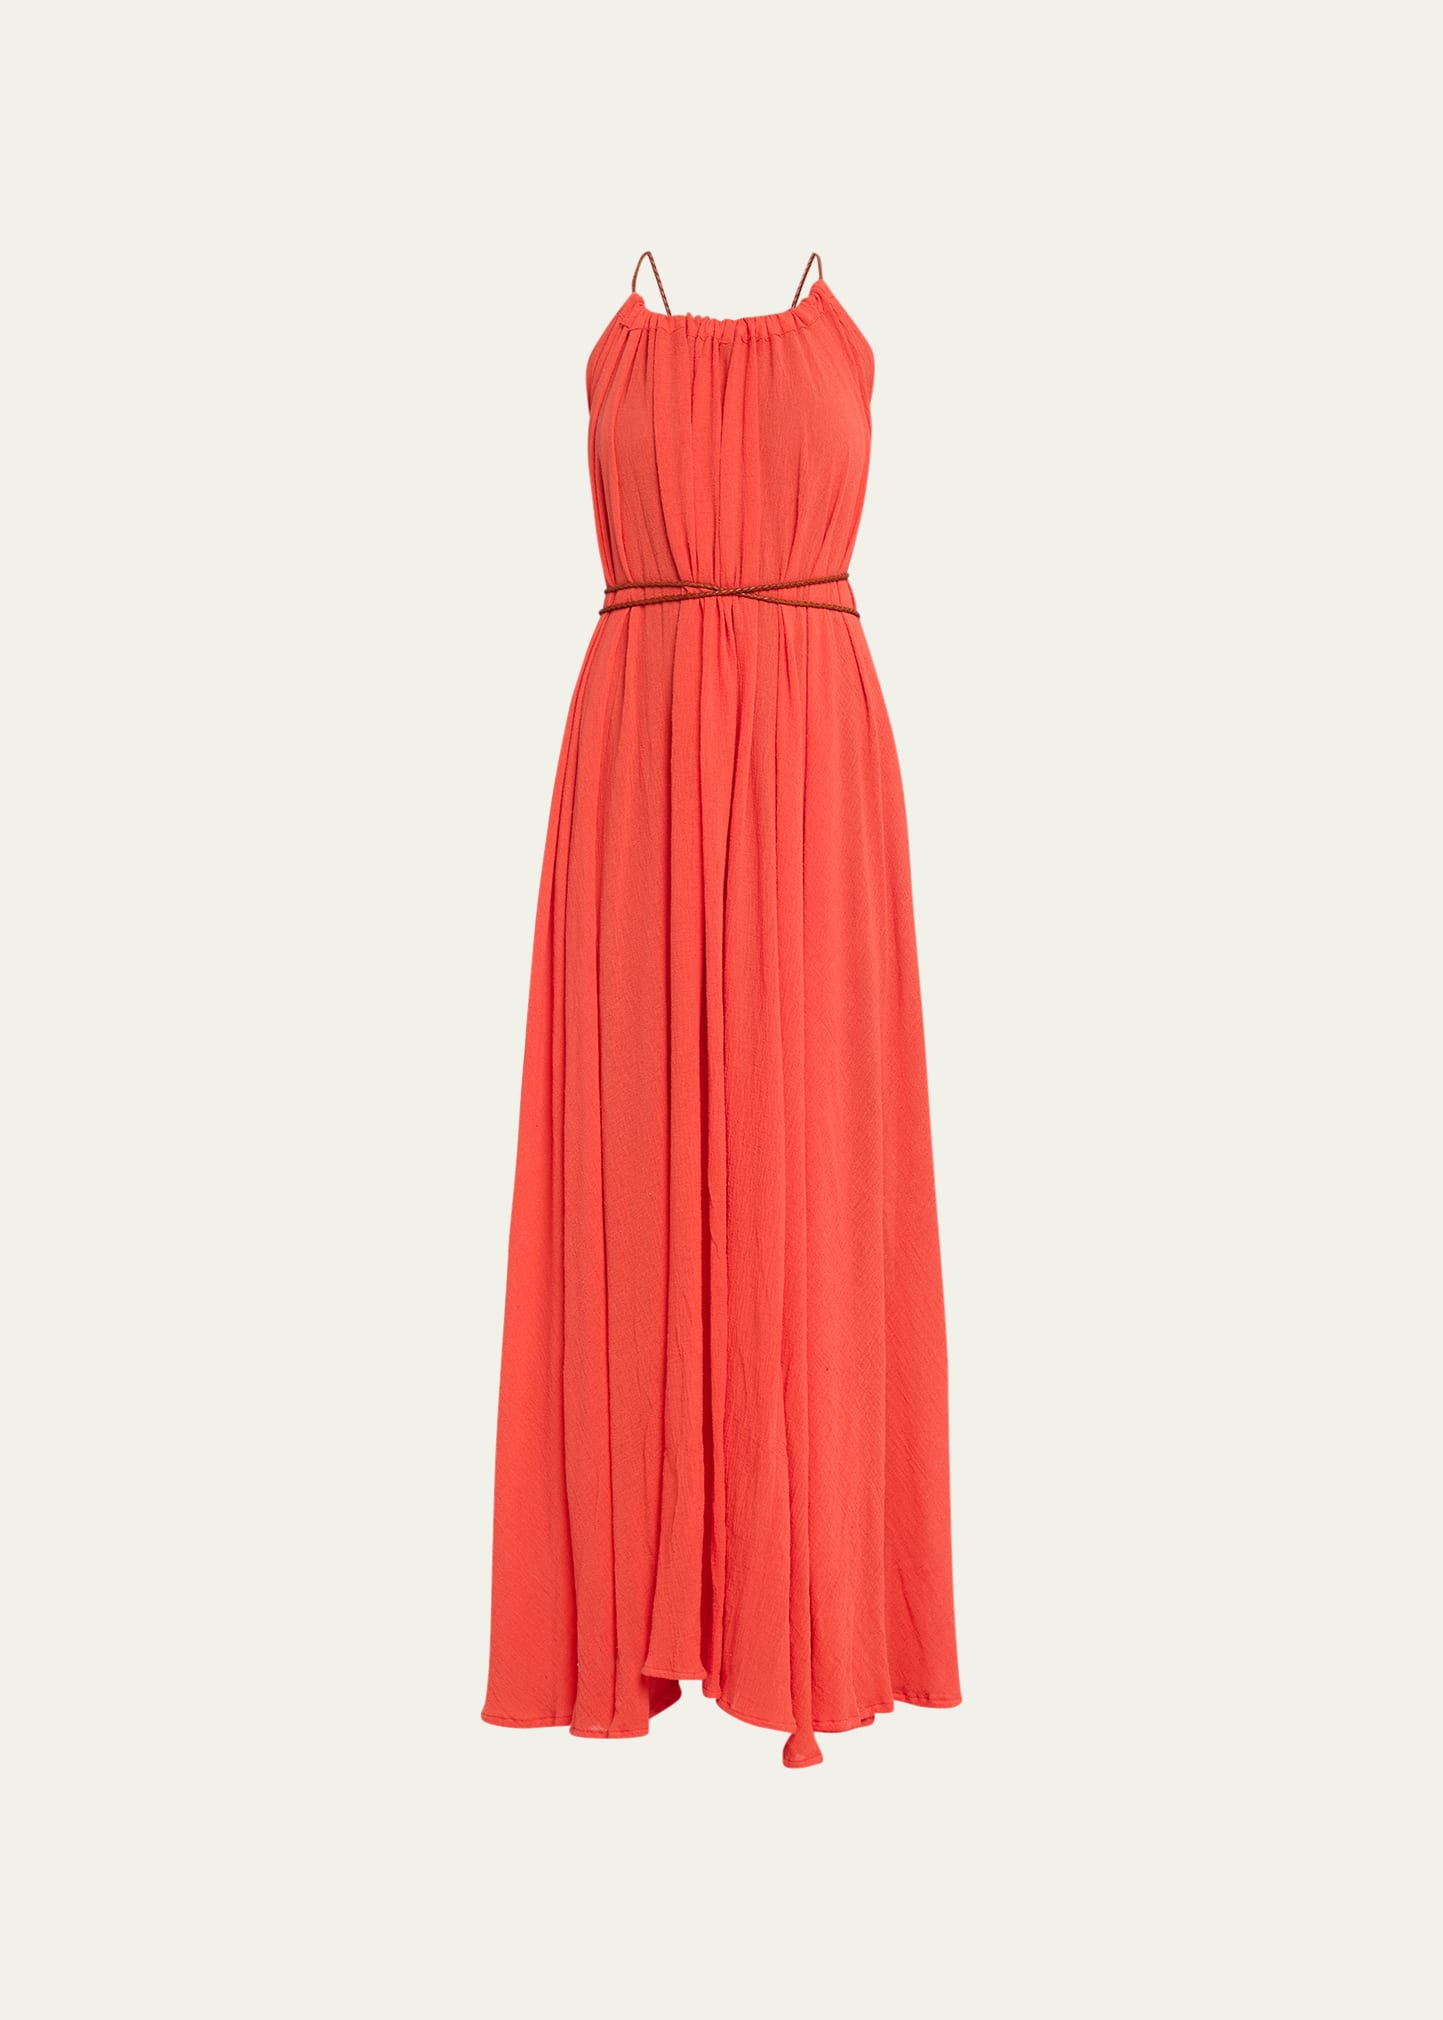 Caravana Allin Maxi Dress With Braided Leather Accents In Poppy